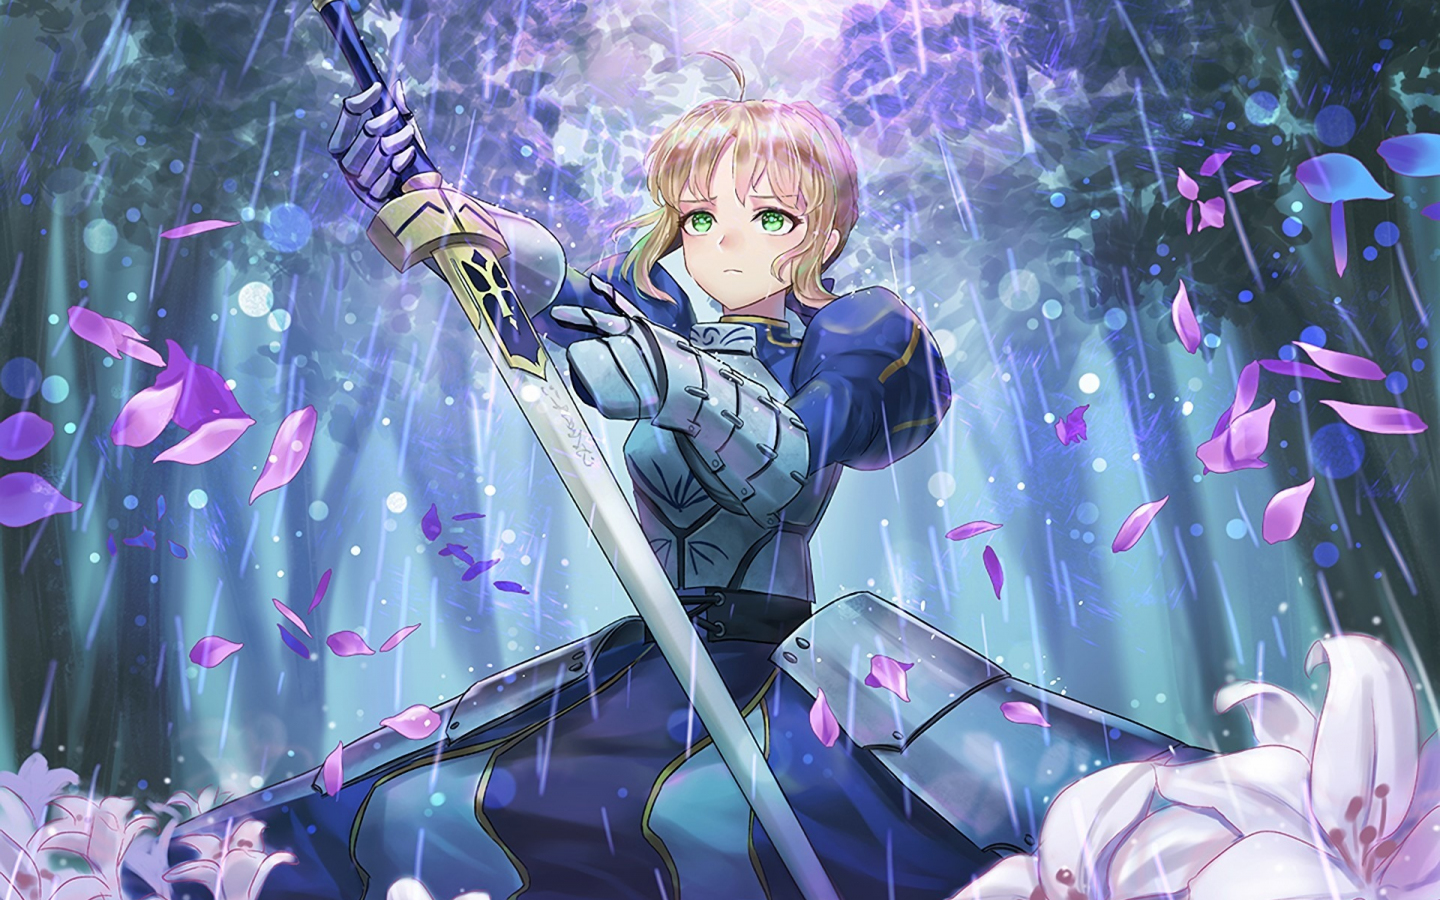 7. Saber (Fate/stay night) - wide 5